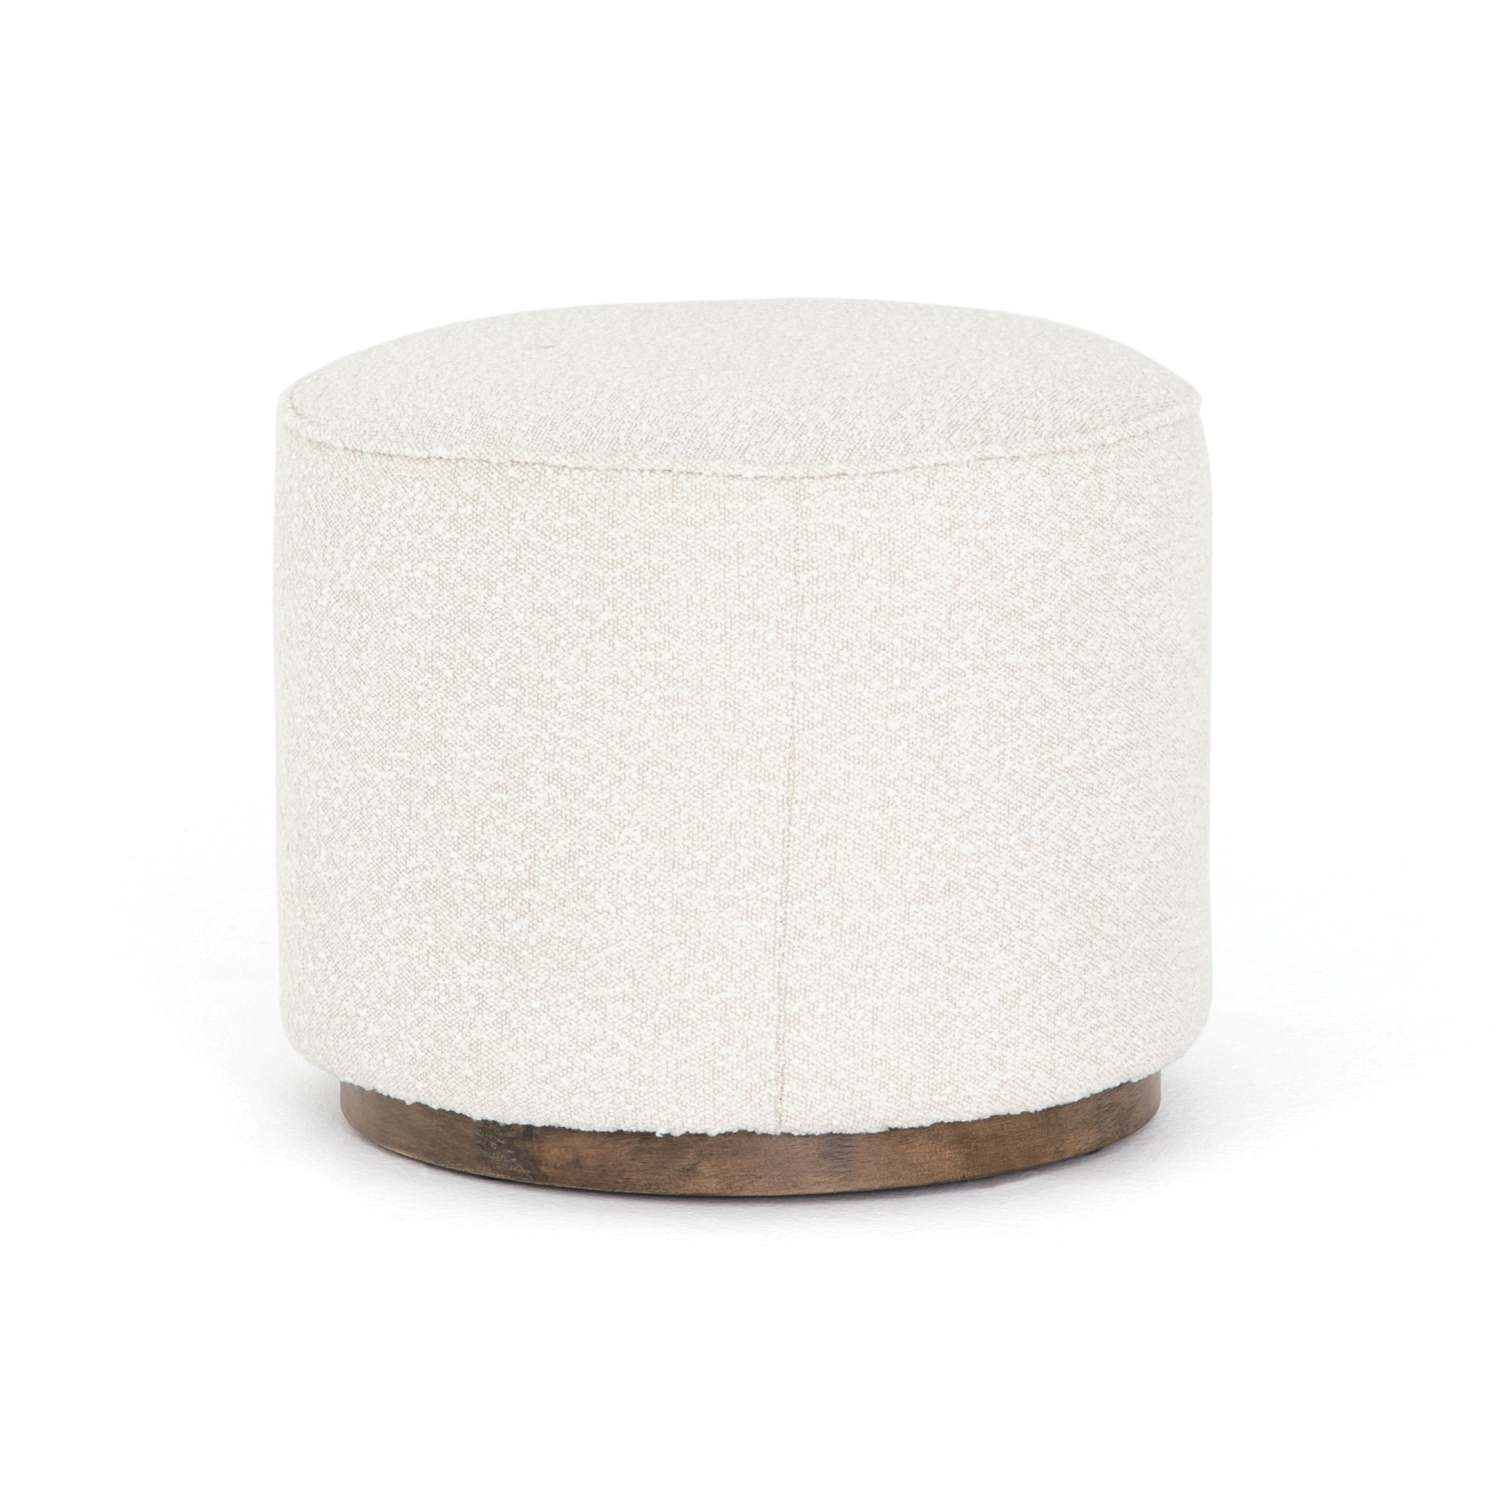 Shop FELICITY SMALL OTTOMAN from Magnolia Home on Openhaus